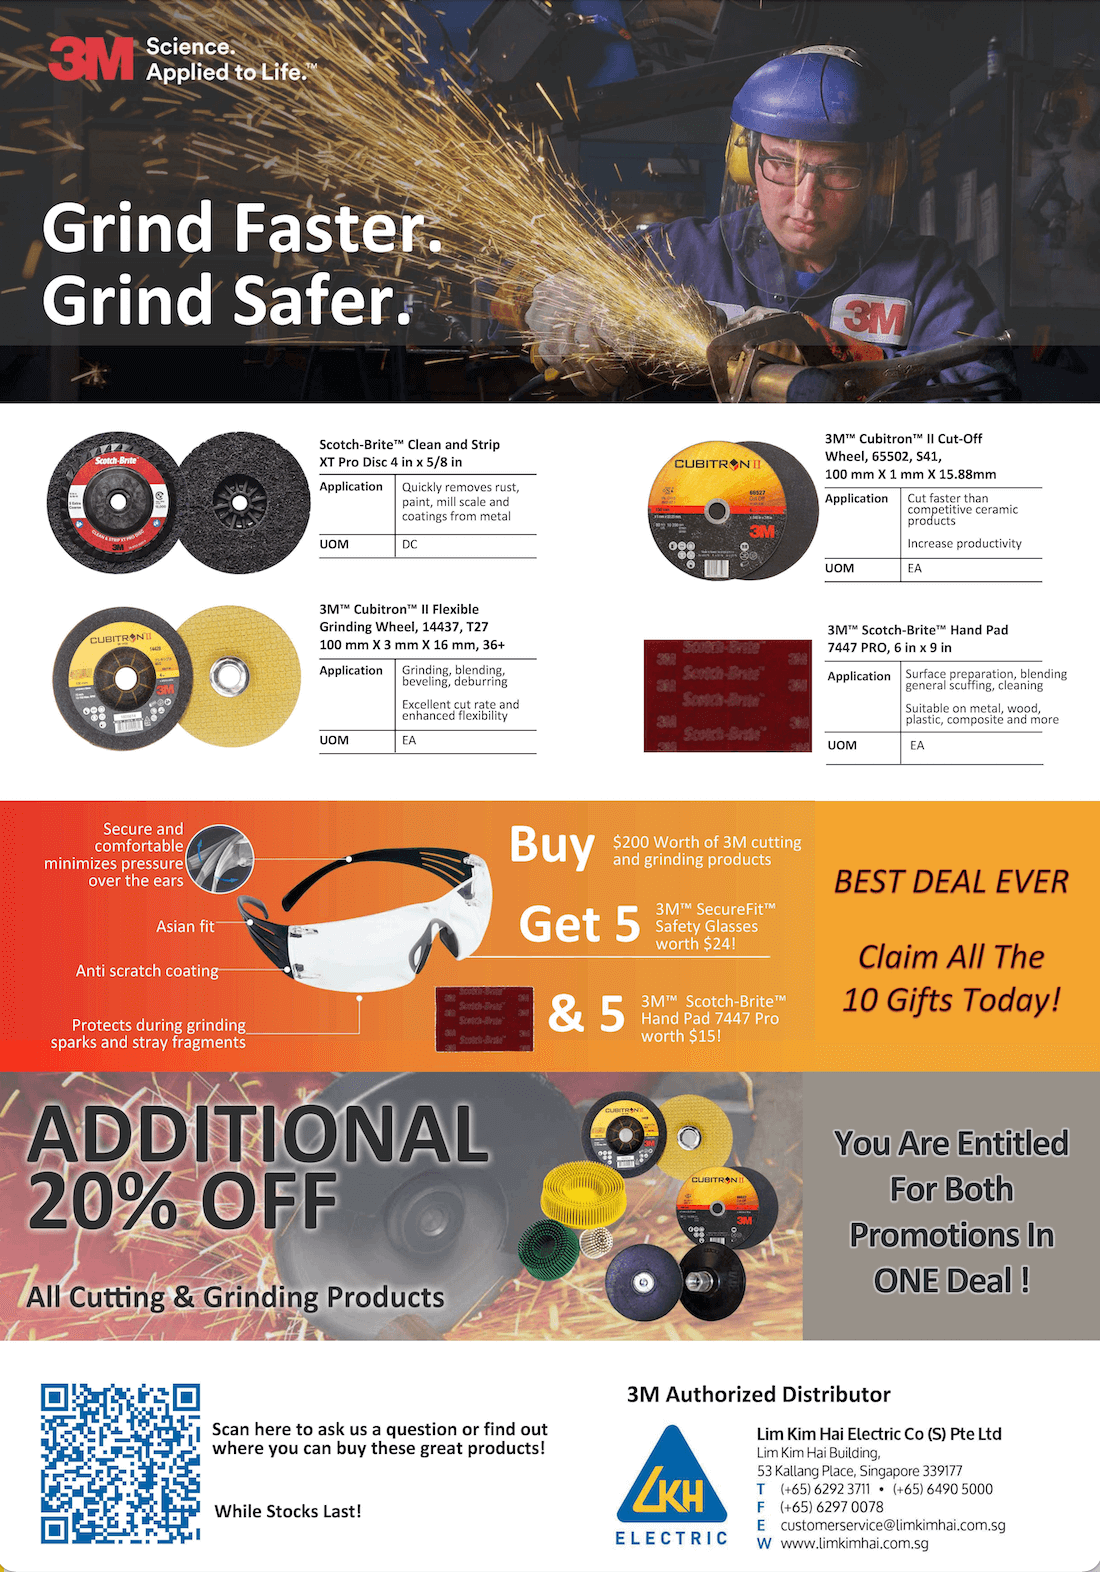 3M Cutting & Grinding Products Promotion